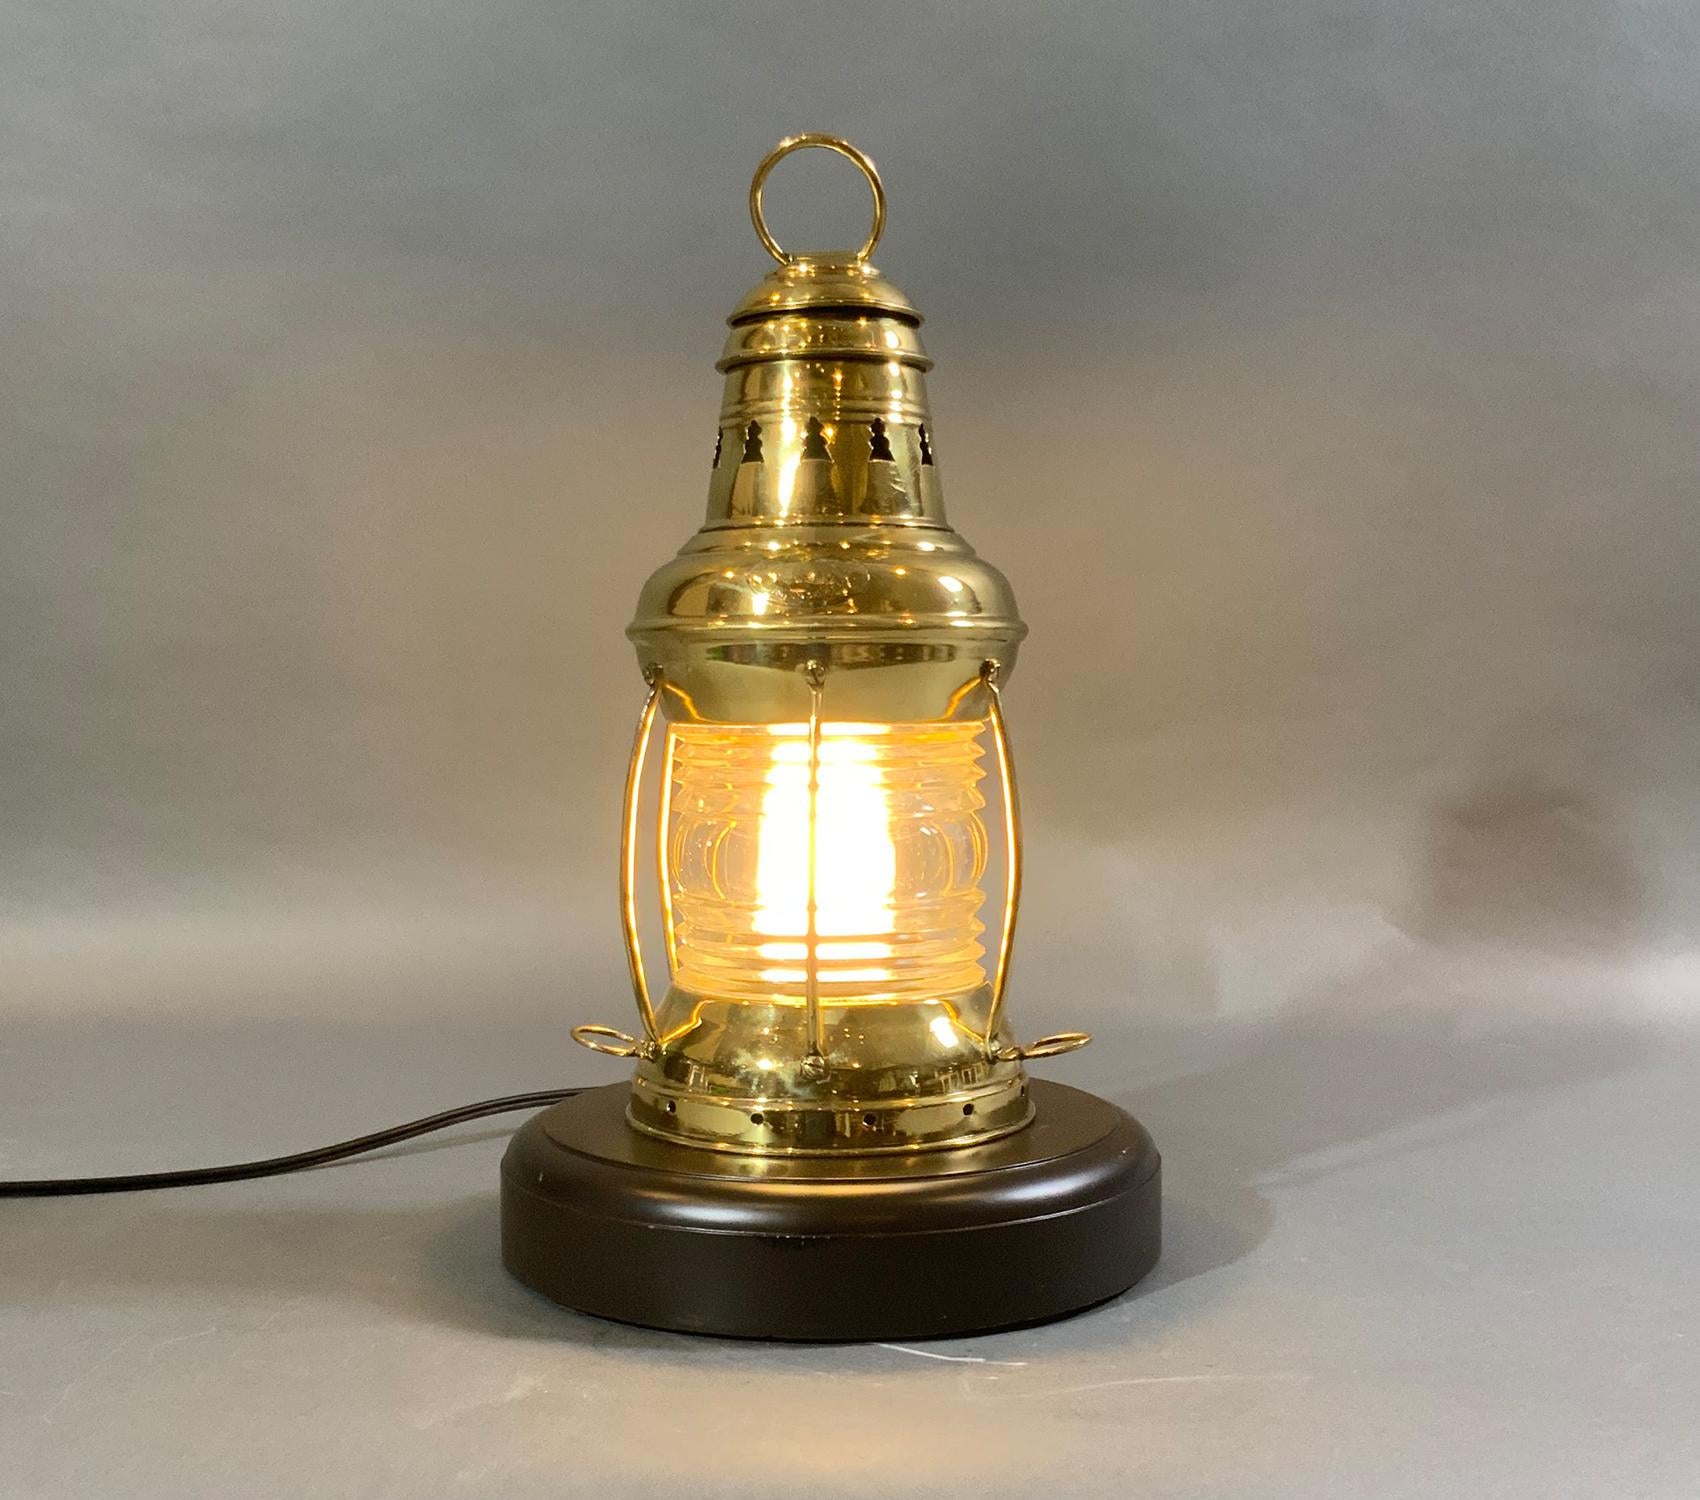 Ships anchor lantern on base. Highly polished and lacquered ships anchor lantern with Fresnel glass lens protected by six brass bars. Fitted to a thick mahogany base. Has a disfigured Perko name tag attached.

Weight: 5 LBS
Overall Dimensions: